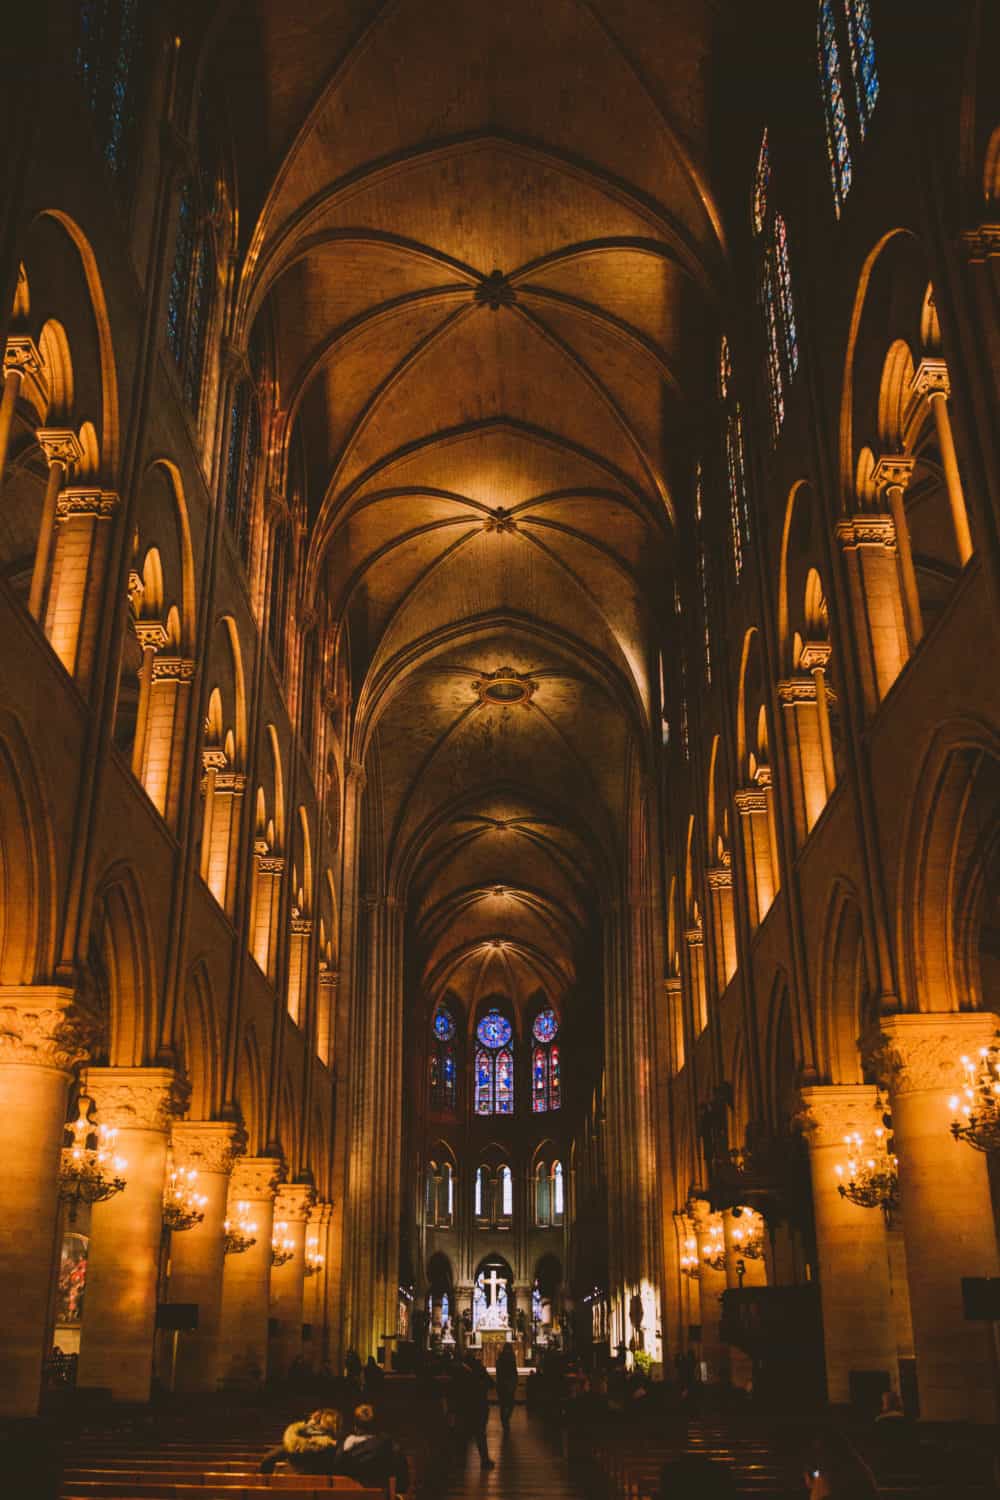 Inside Notre Dame - Discover the best photography spots in Paris, France in this all-inclusive post! We're including iconic favorites like the Eiffel Tower and Champs Elyssse, but also hidden gems like Saint Chapelle and Musee d'Orsay Clocks. Find the best Instagram spots in Paris here! #paris #france #eiffeltower #photography #french #instagram #laduree #champselysees #museedorsay #arcdetriomphe #louvre #macaron #europe